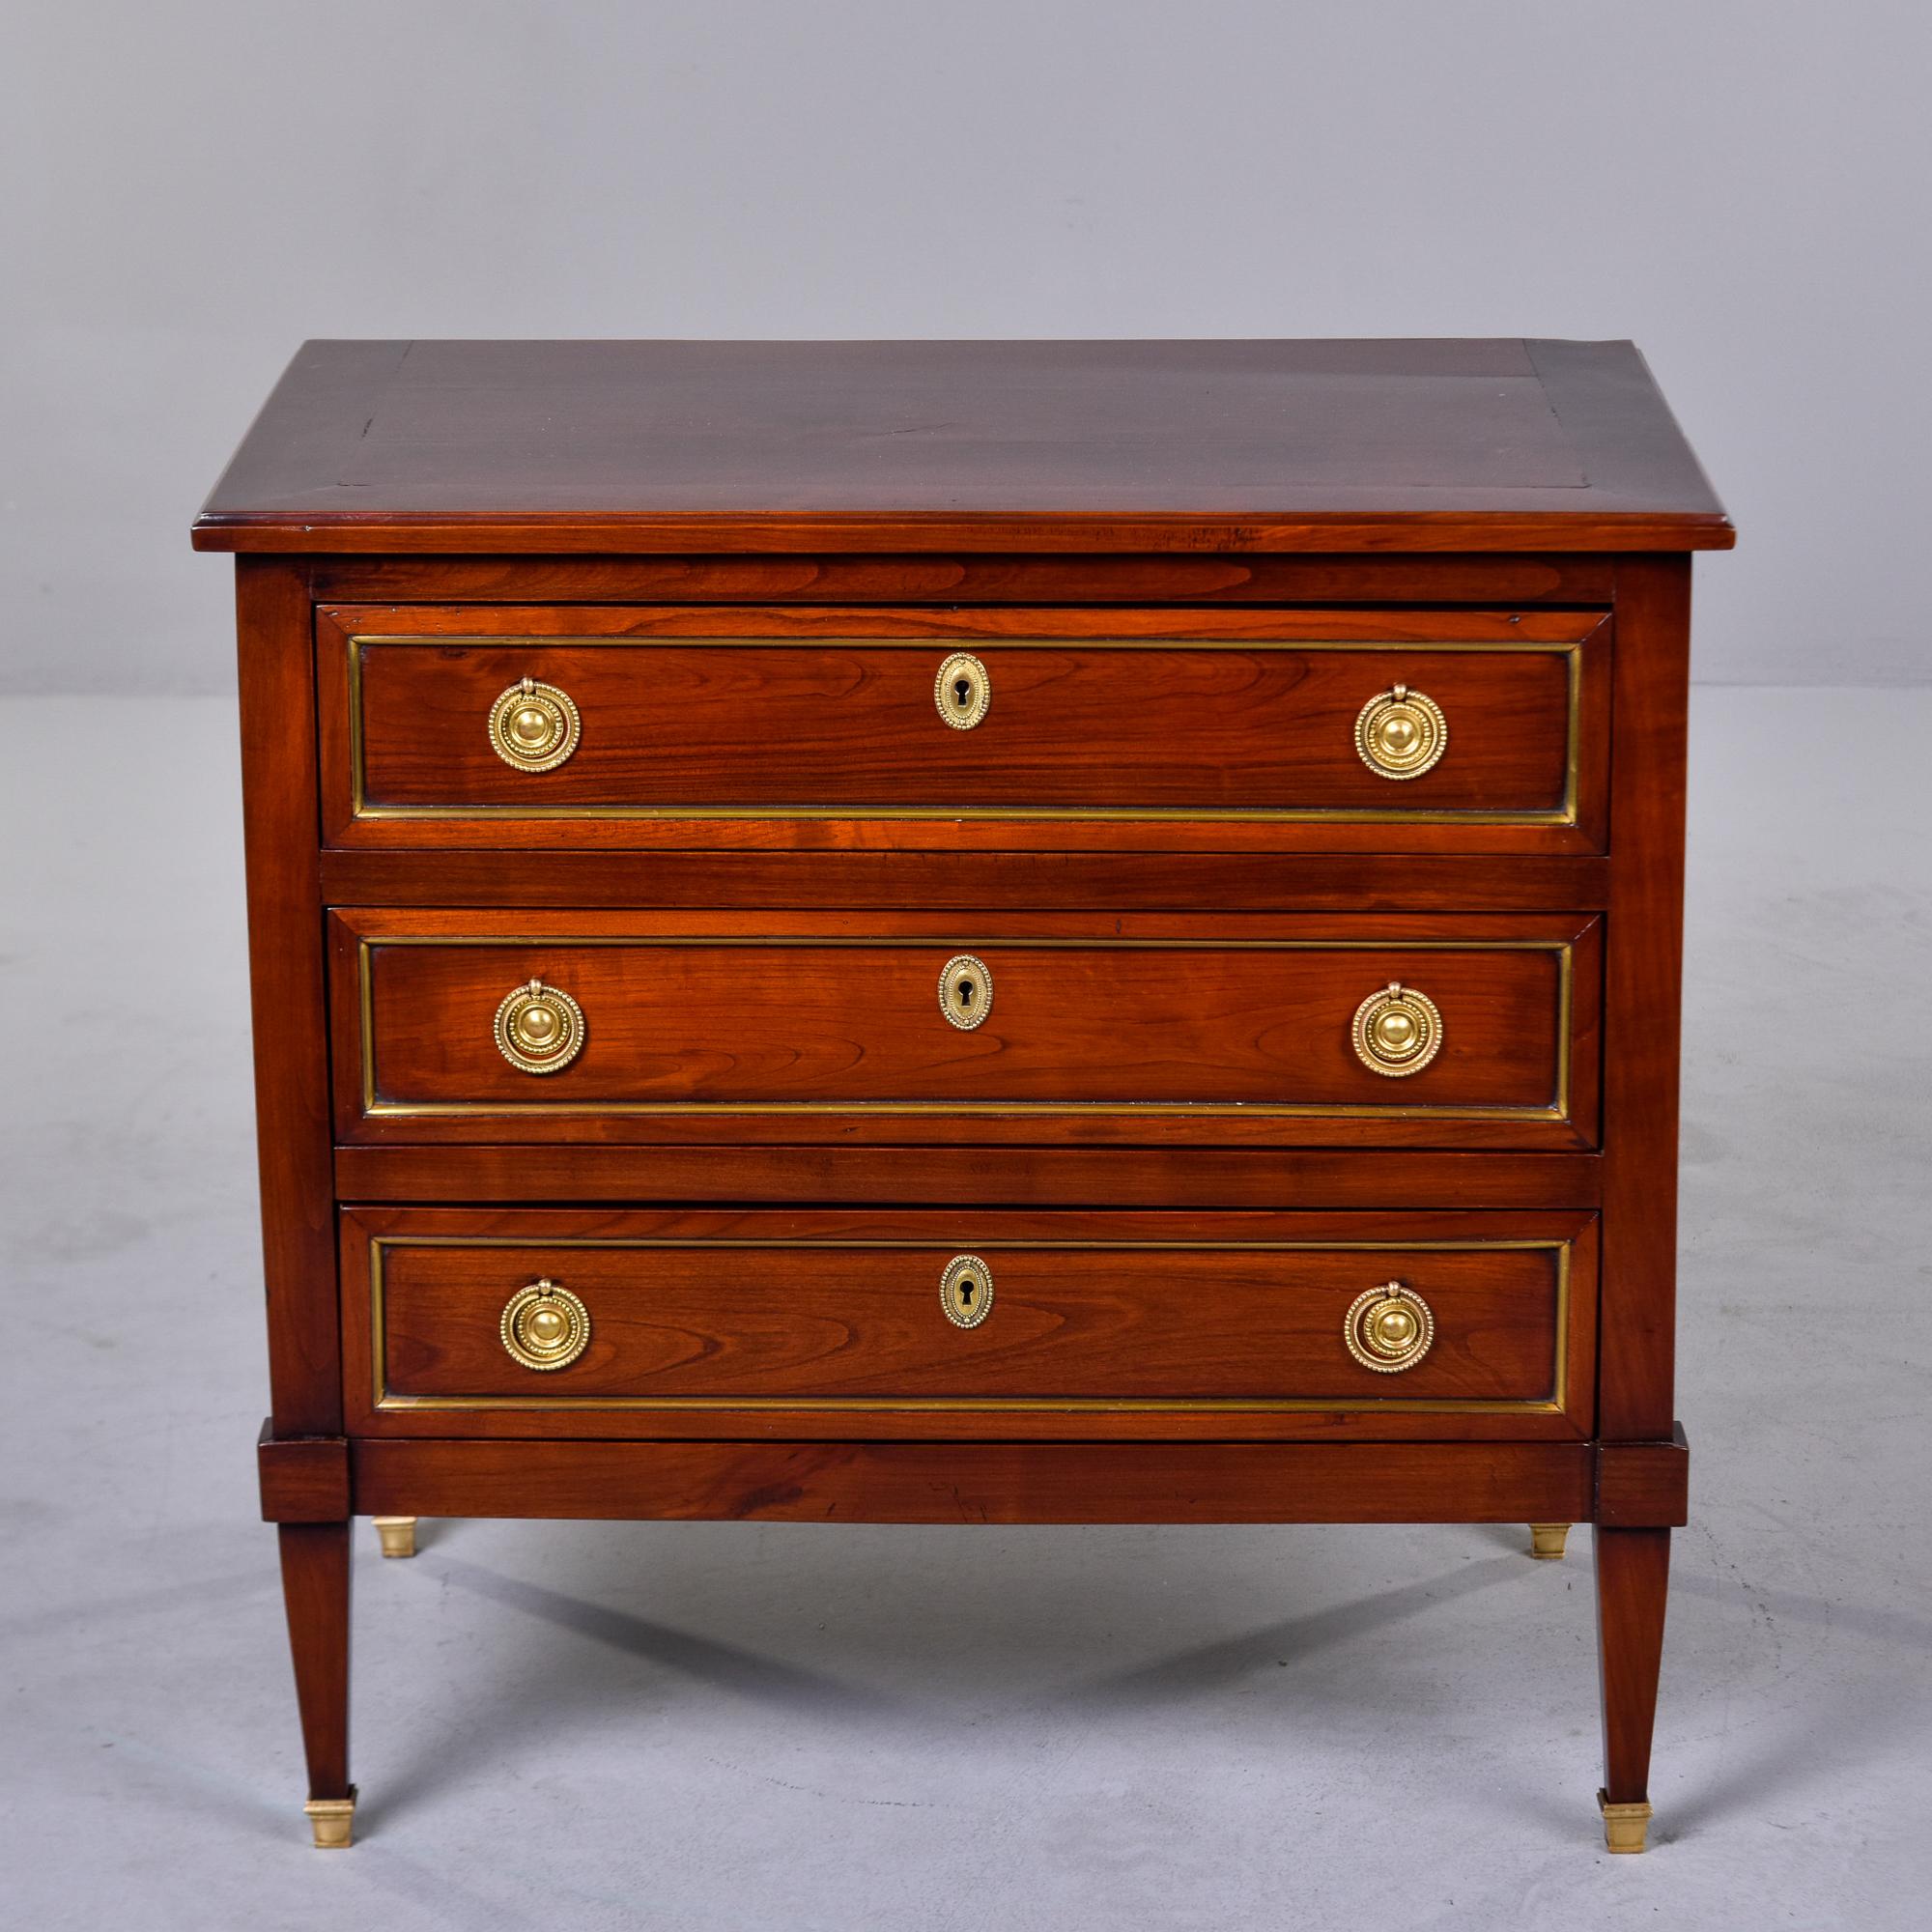 Found in England, this three drawer cherry chest dates from the 1920s. This handsome chest is a versatile size and could be used next to a sofa or bed. Drawers feature dovetail construction, brass-trimmed fronts, brass ring-pull hardware and